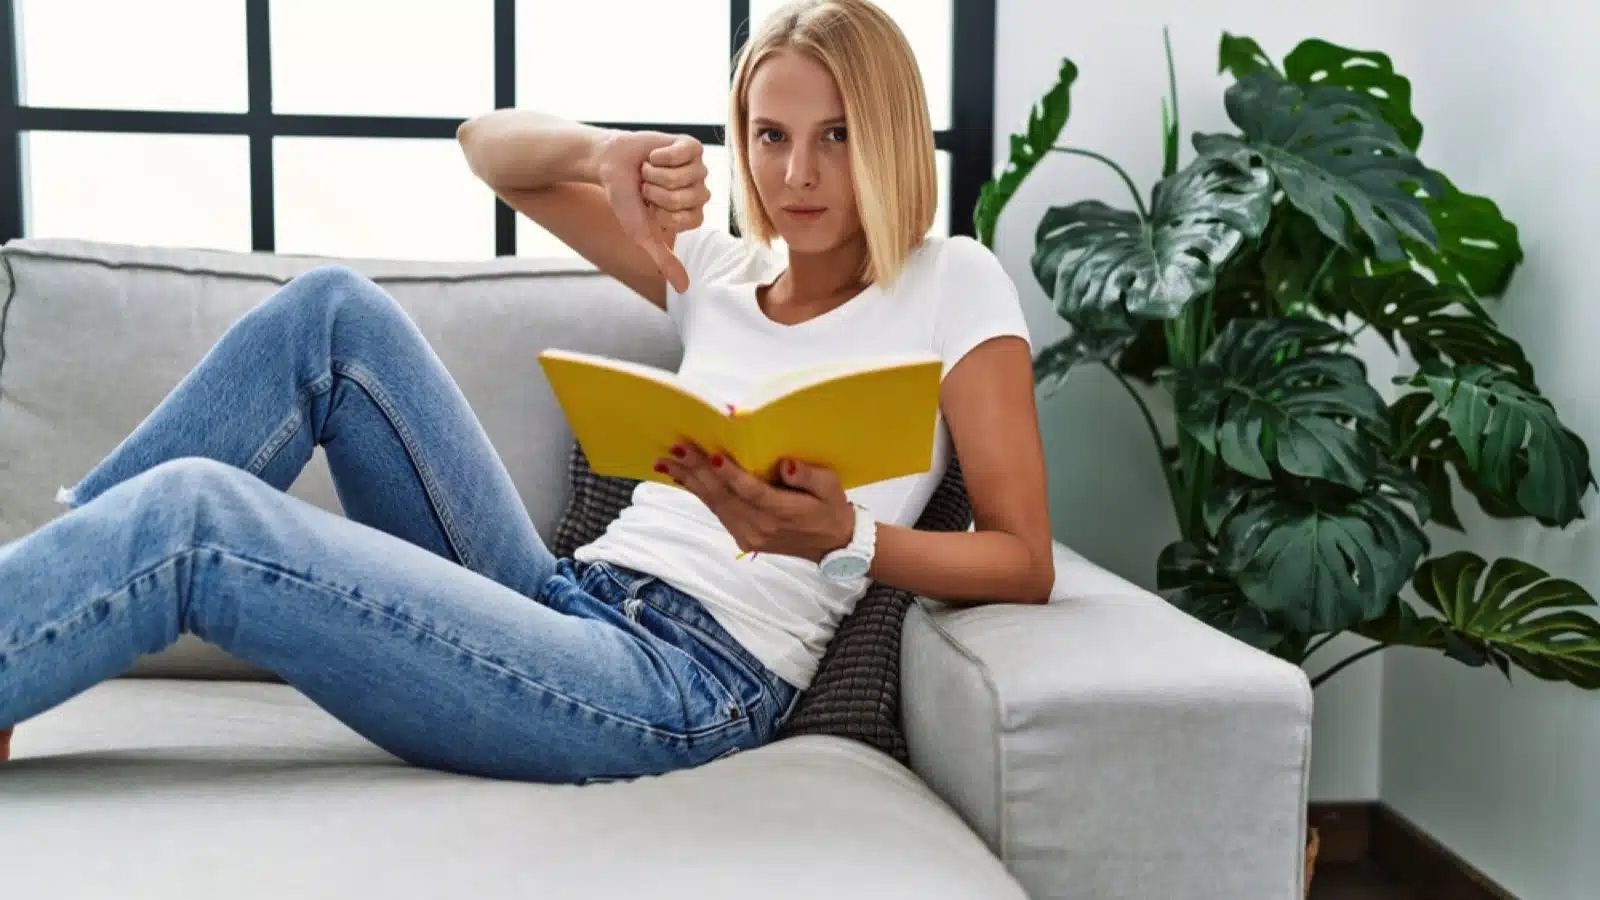 Woman reading book showing thumbs down reaction